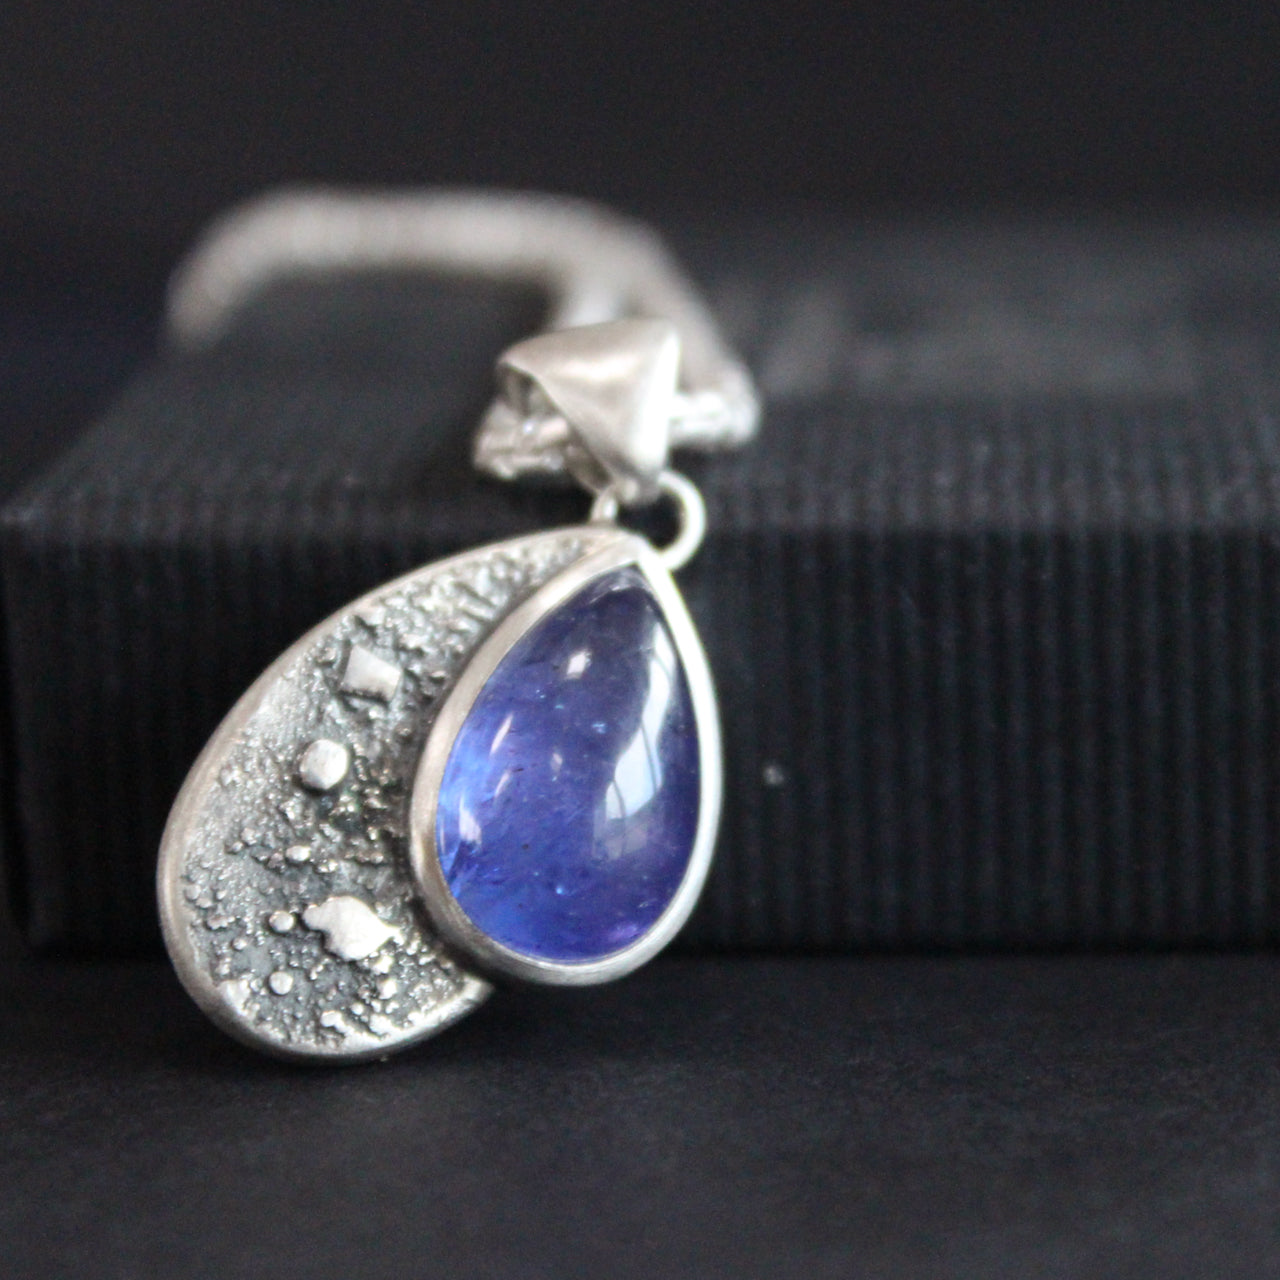 Tanzanite and textured silver pendant by Carin Lindberg